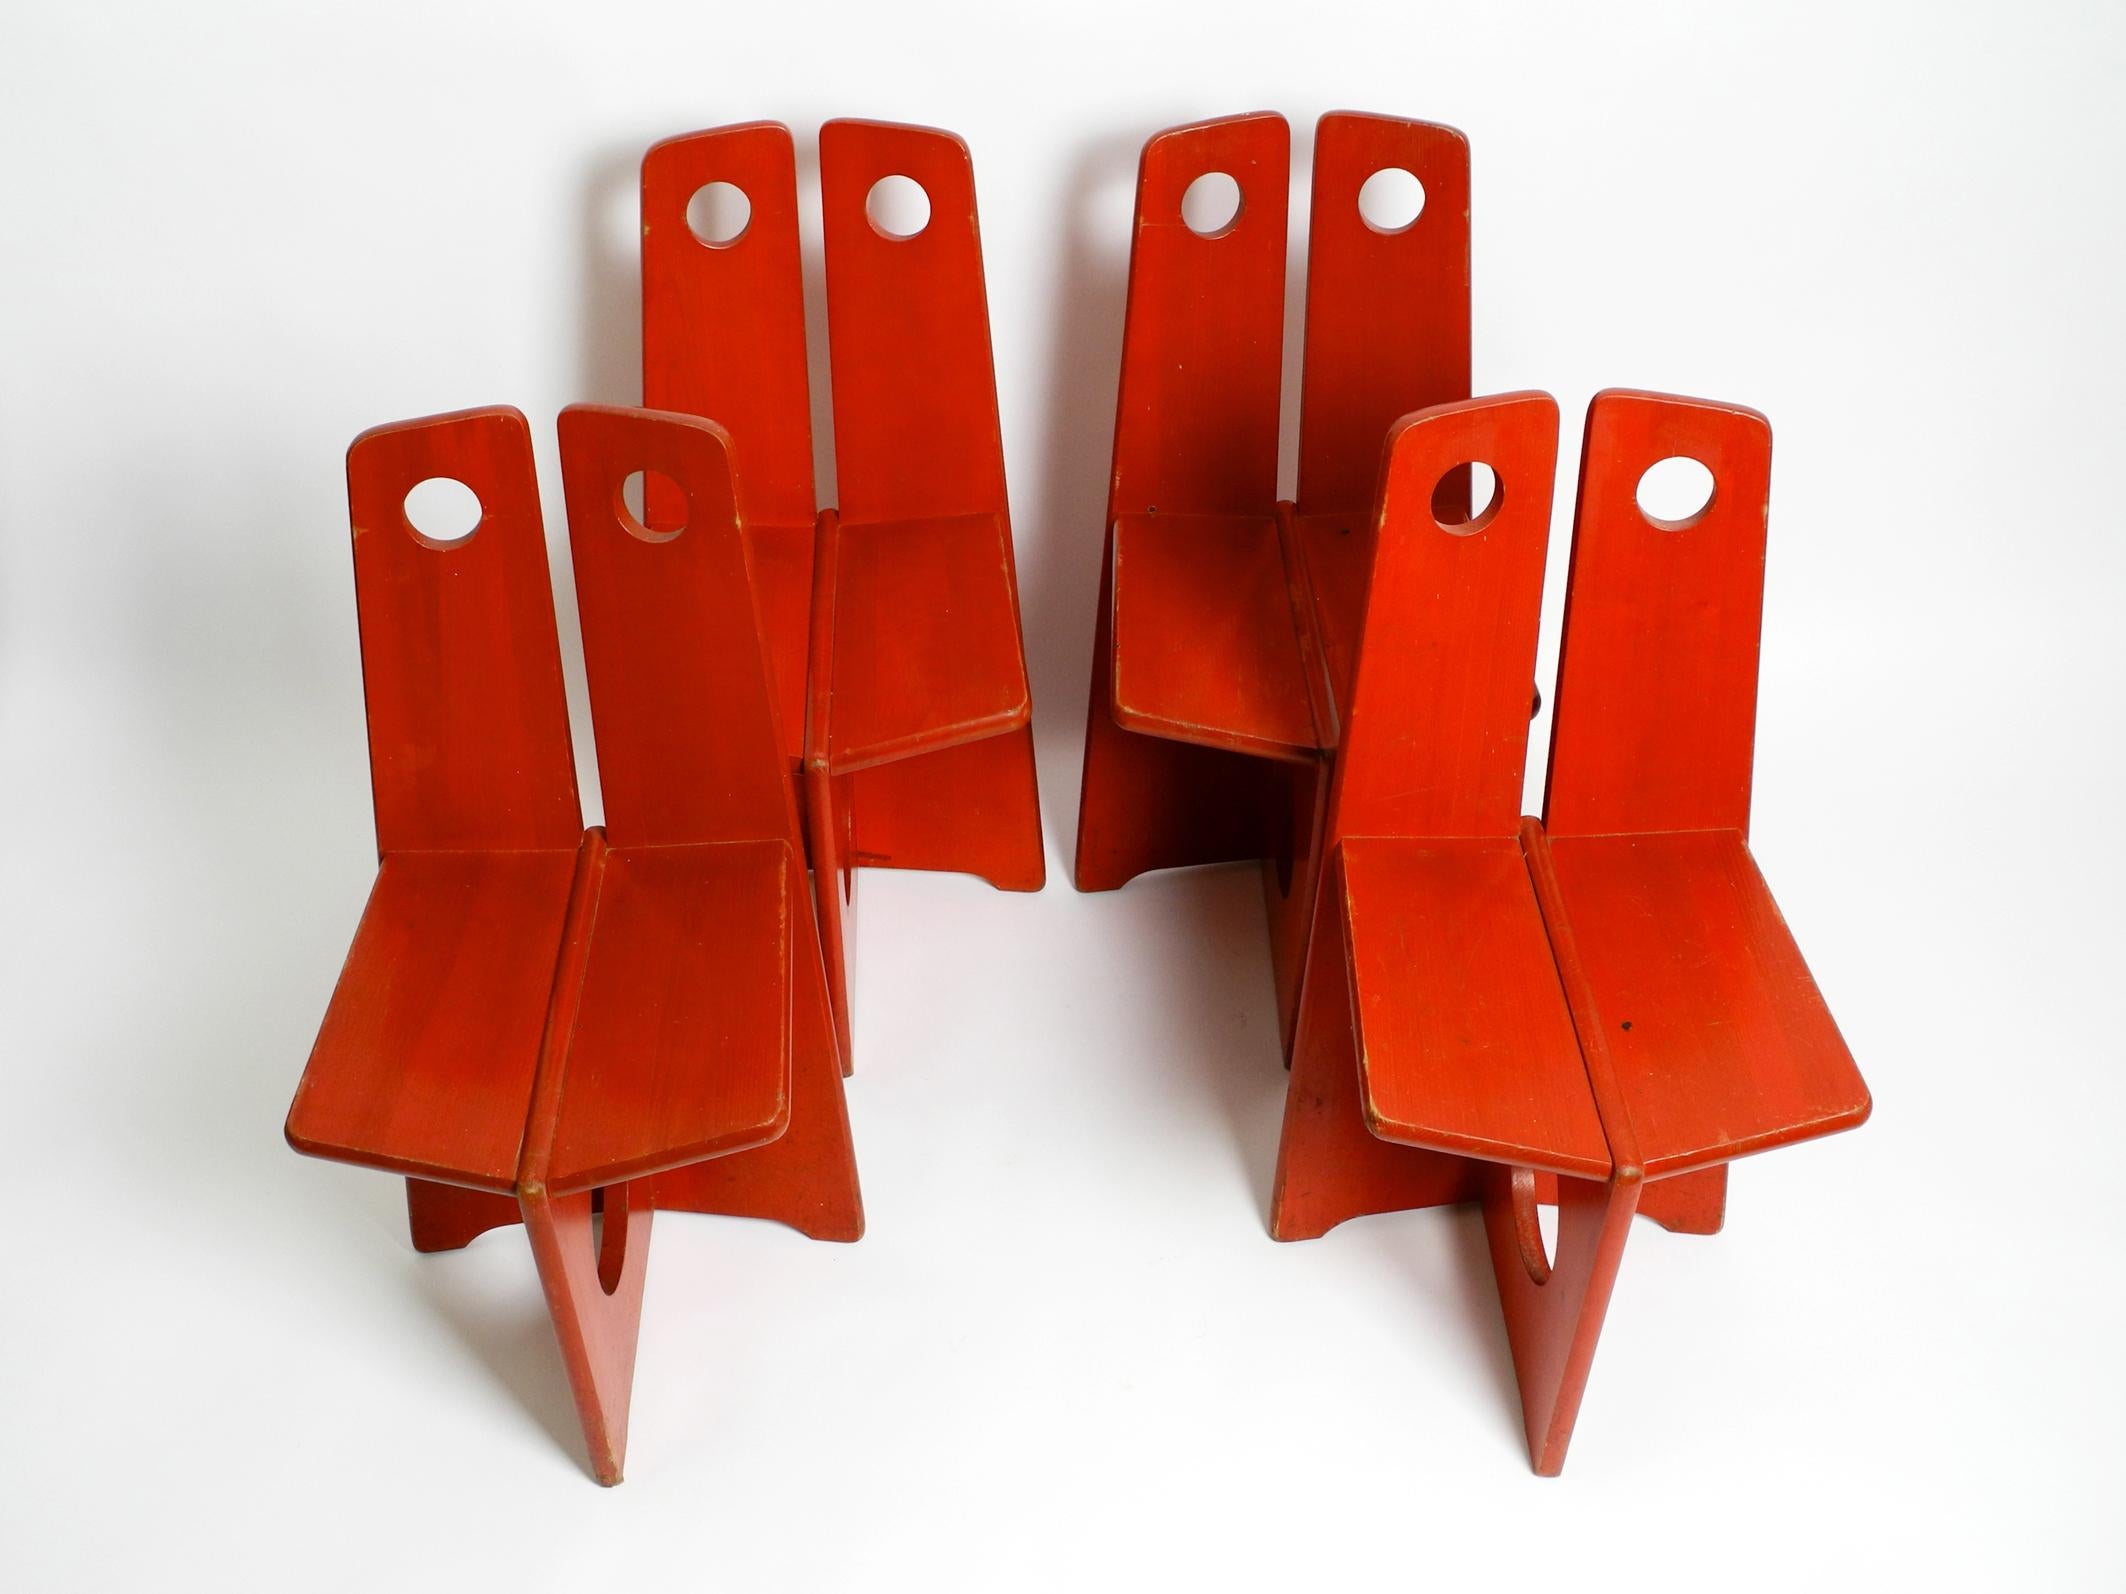 Space Age Set of 4 Original Gilbert Marklund Pine Chairs for Furusnickarn AB Sweden, 1970s